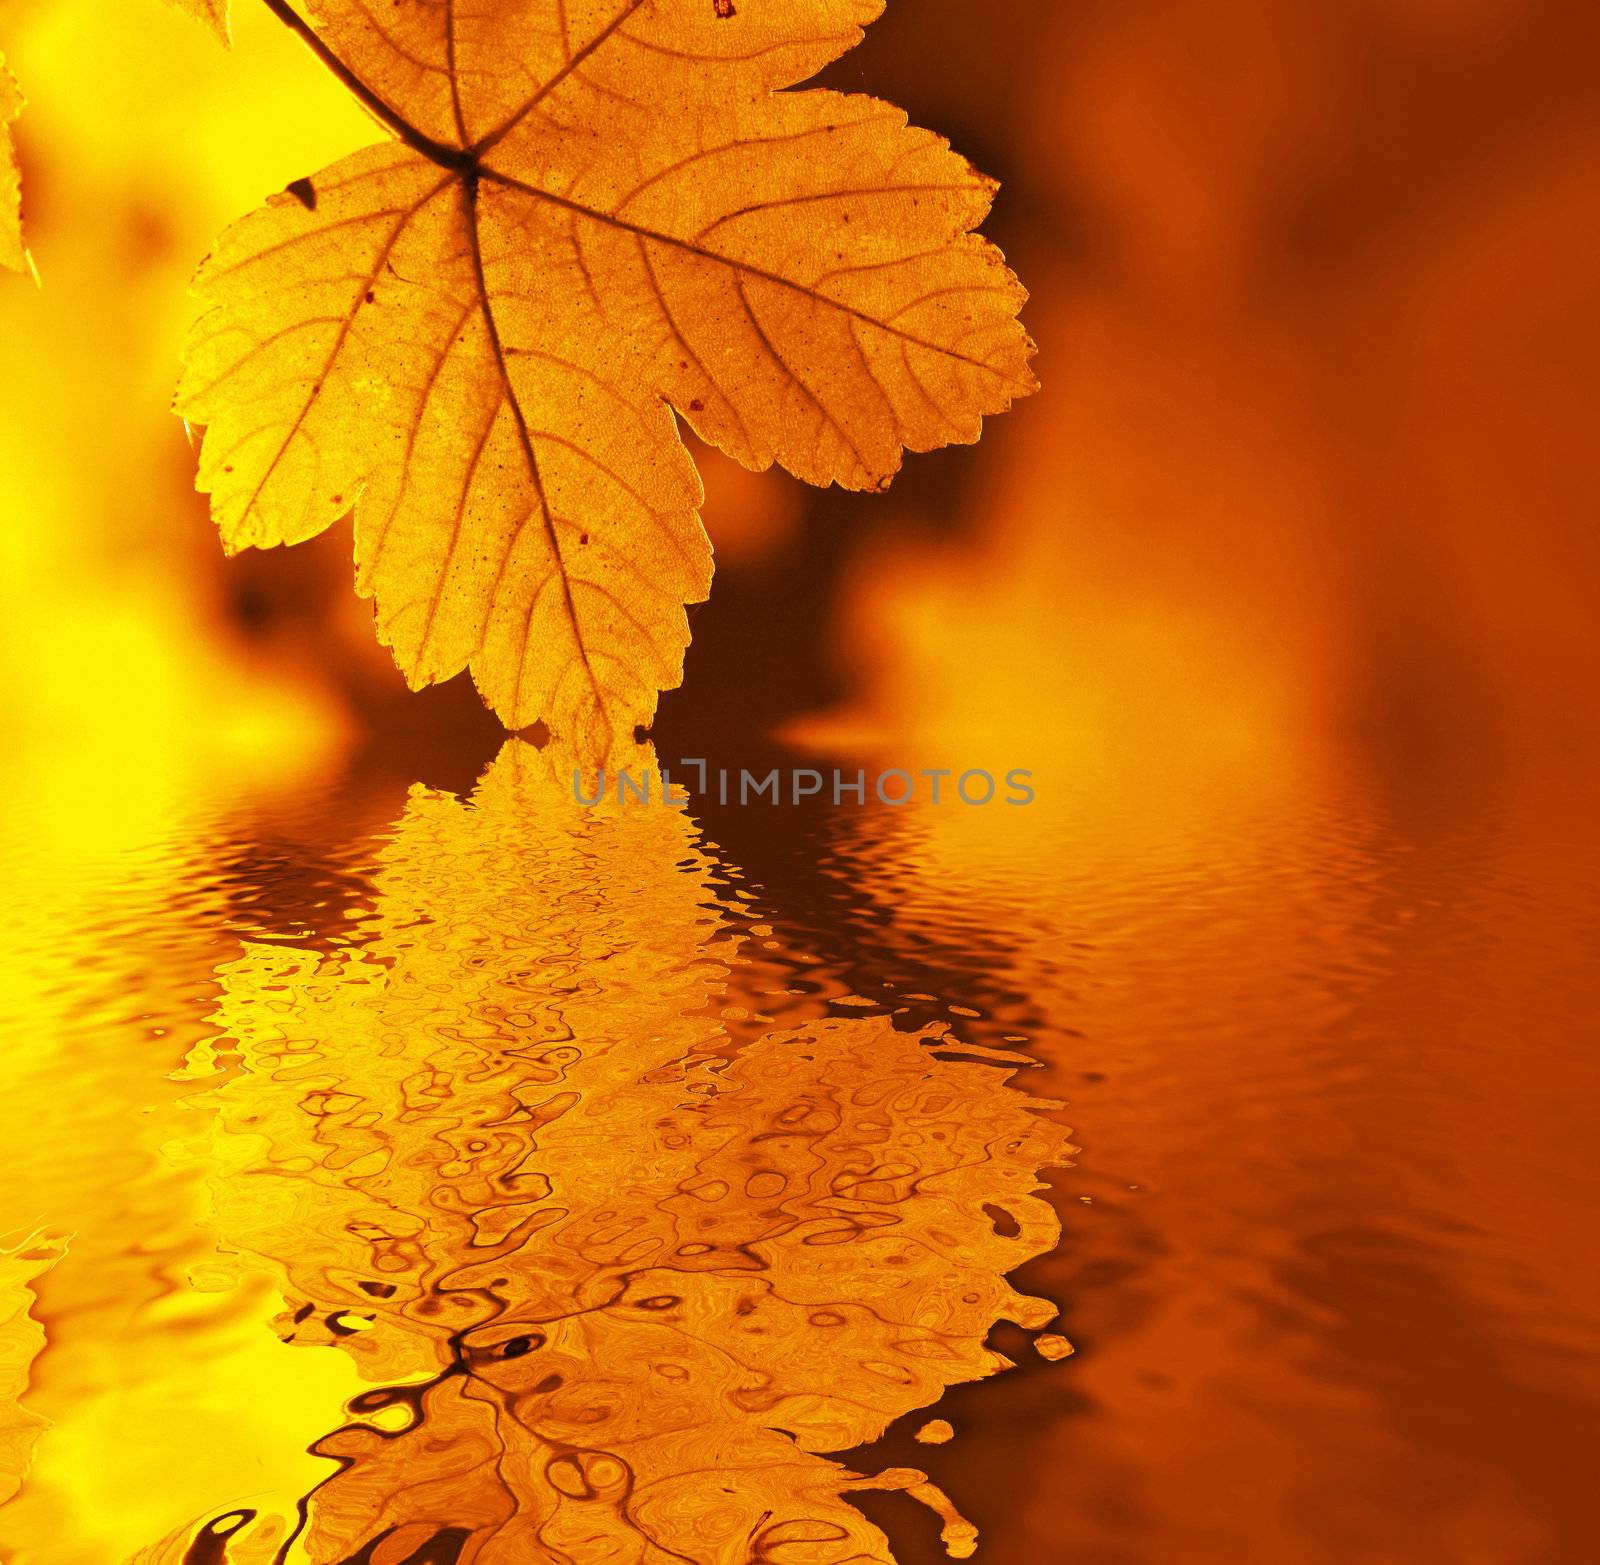 An image of yellow leaf